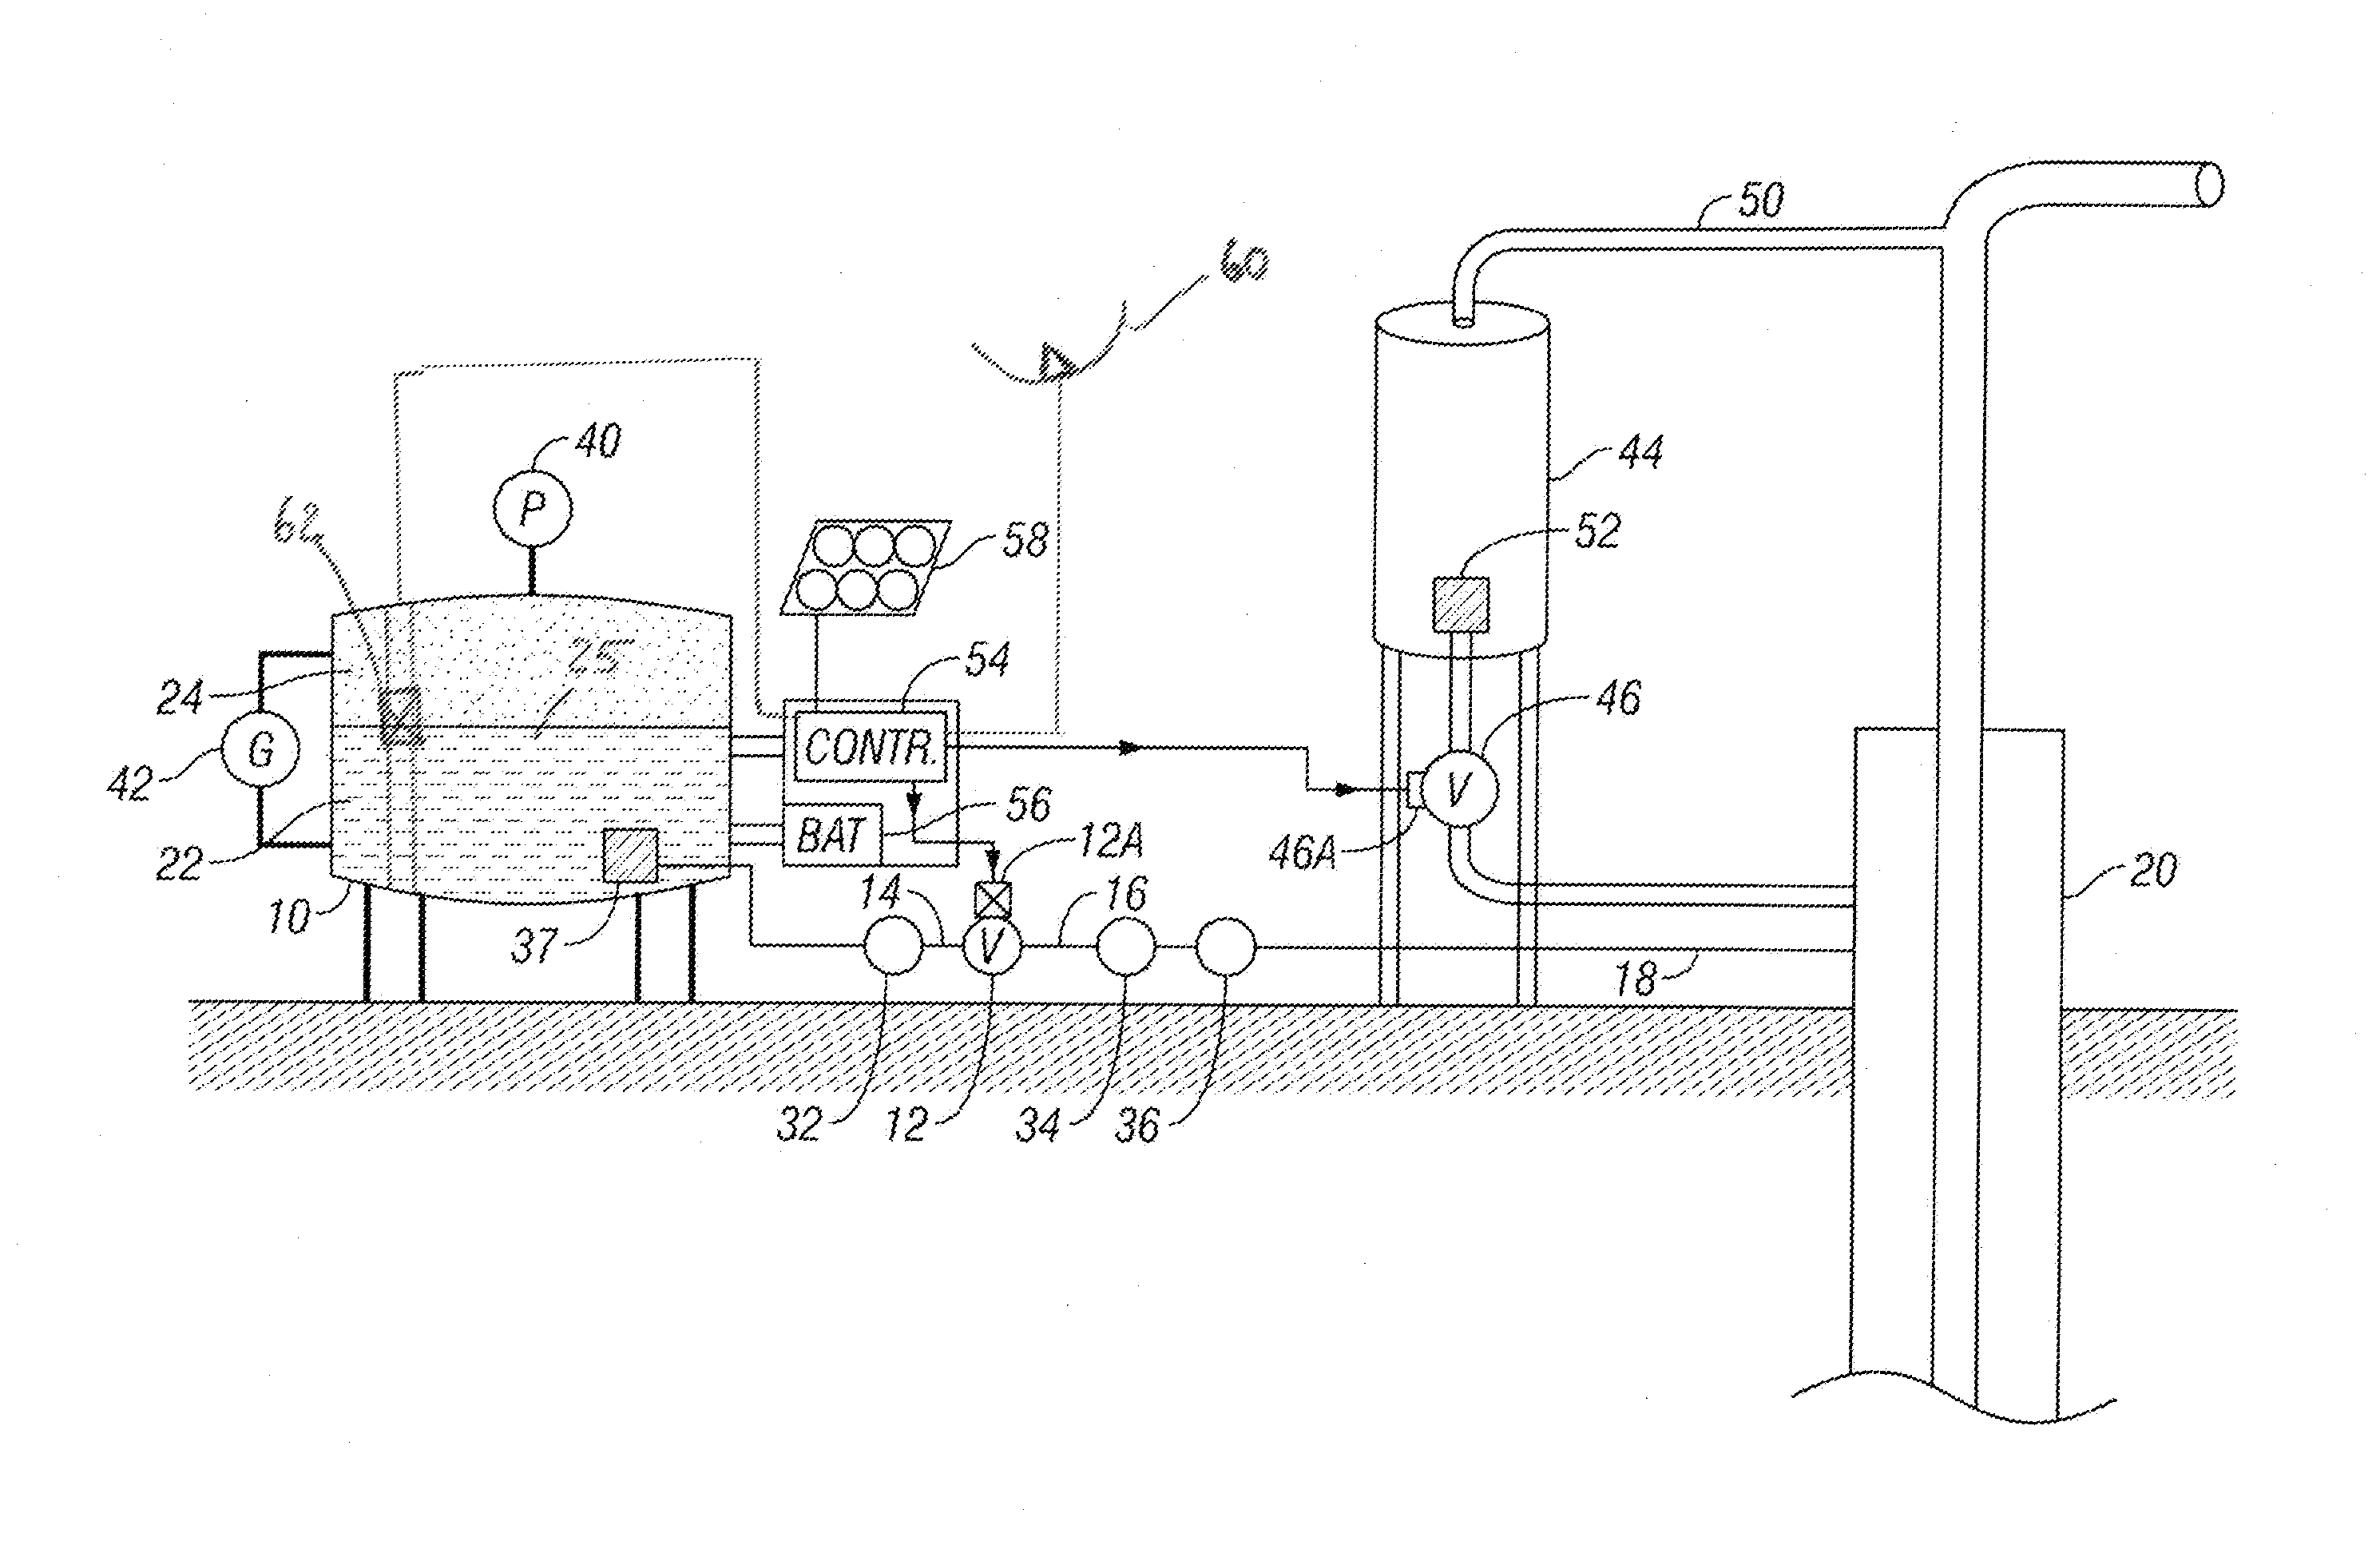 Automatic chemical treatment system with liquid level sensor in chemical tank for calibration and chemical dispensing rate control